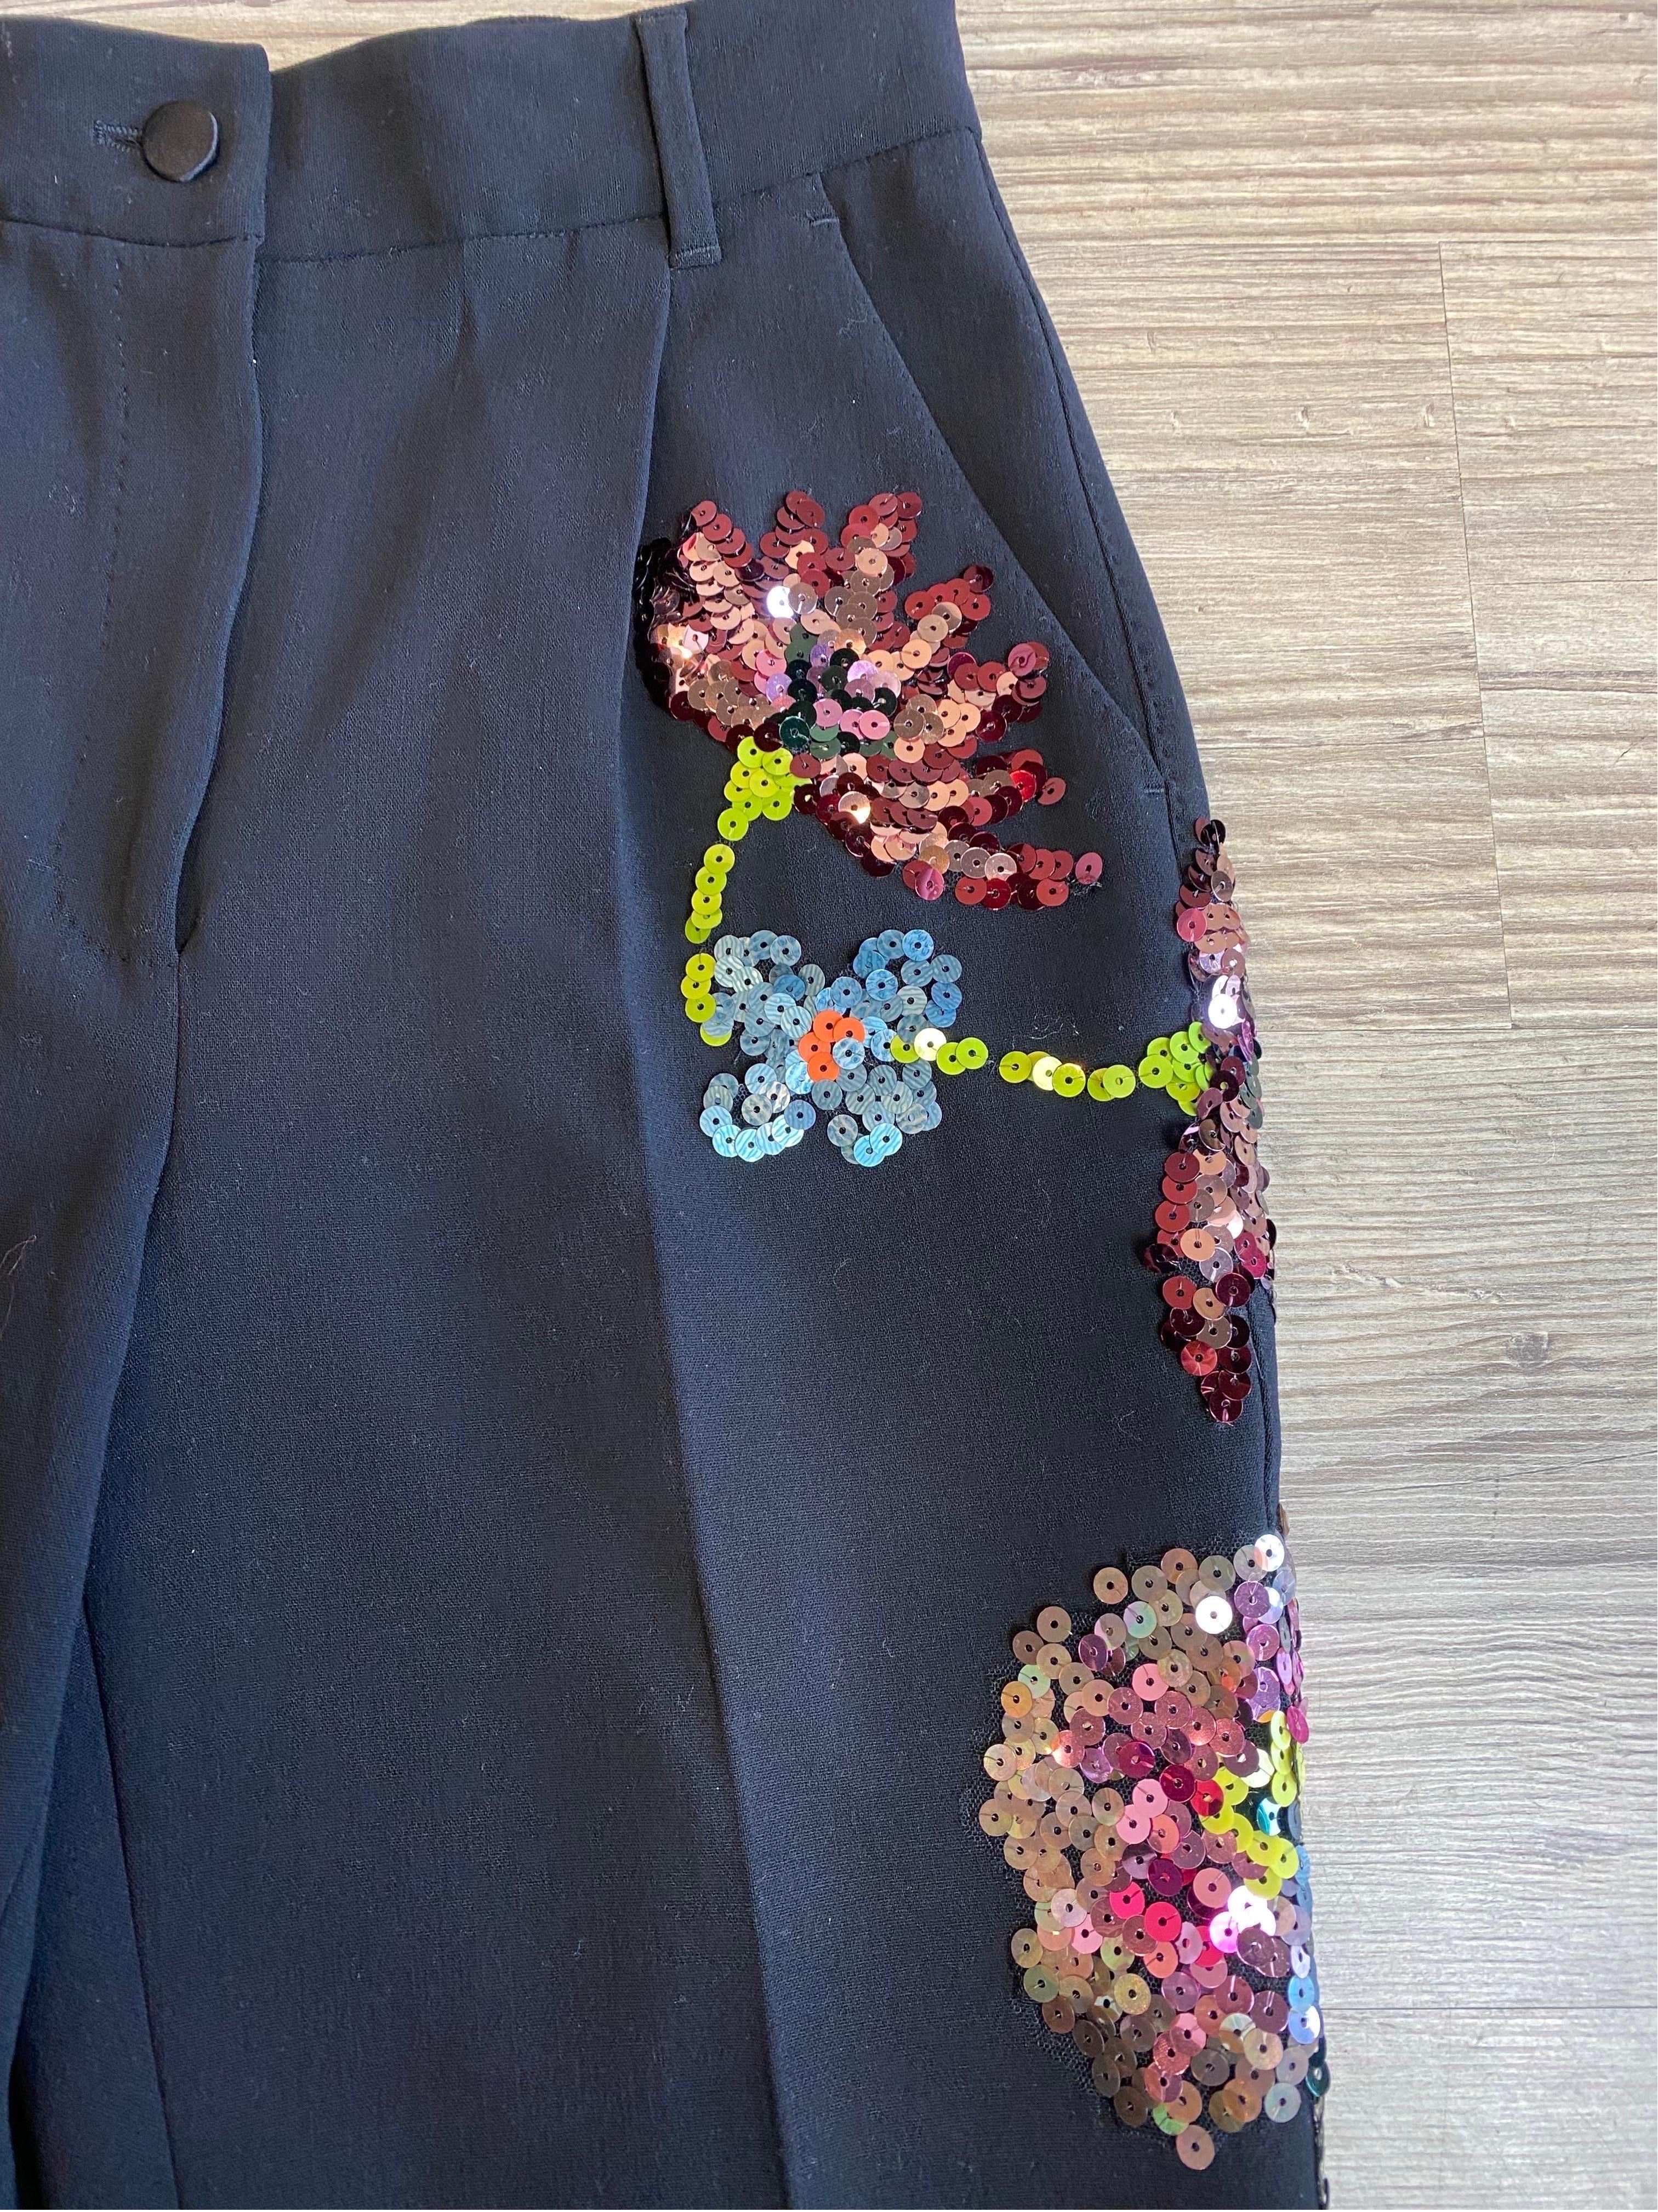 Dolce and Gabbana Slim flower strass details Black Pants In Excellent Condition For Sale In Carnate, IT